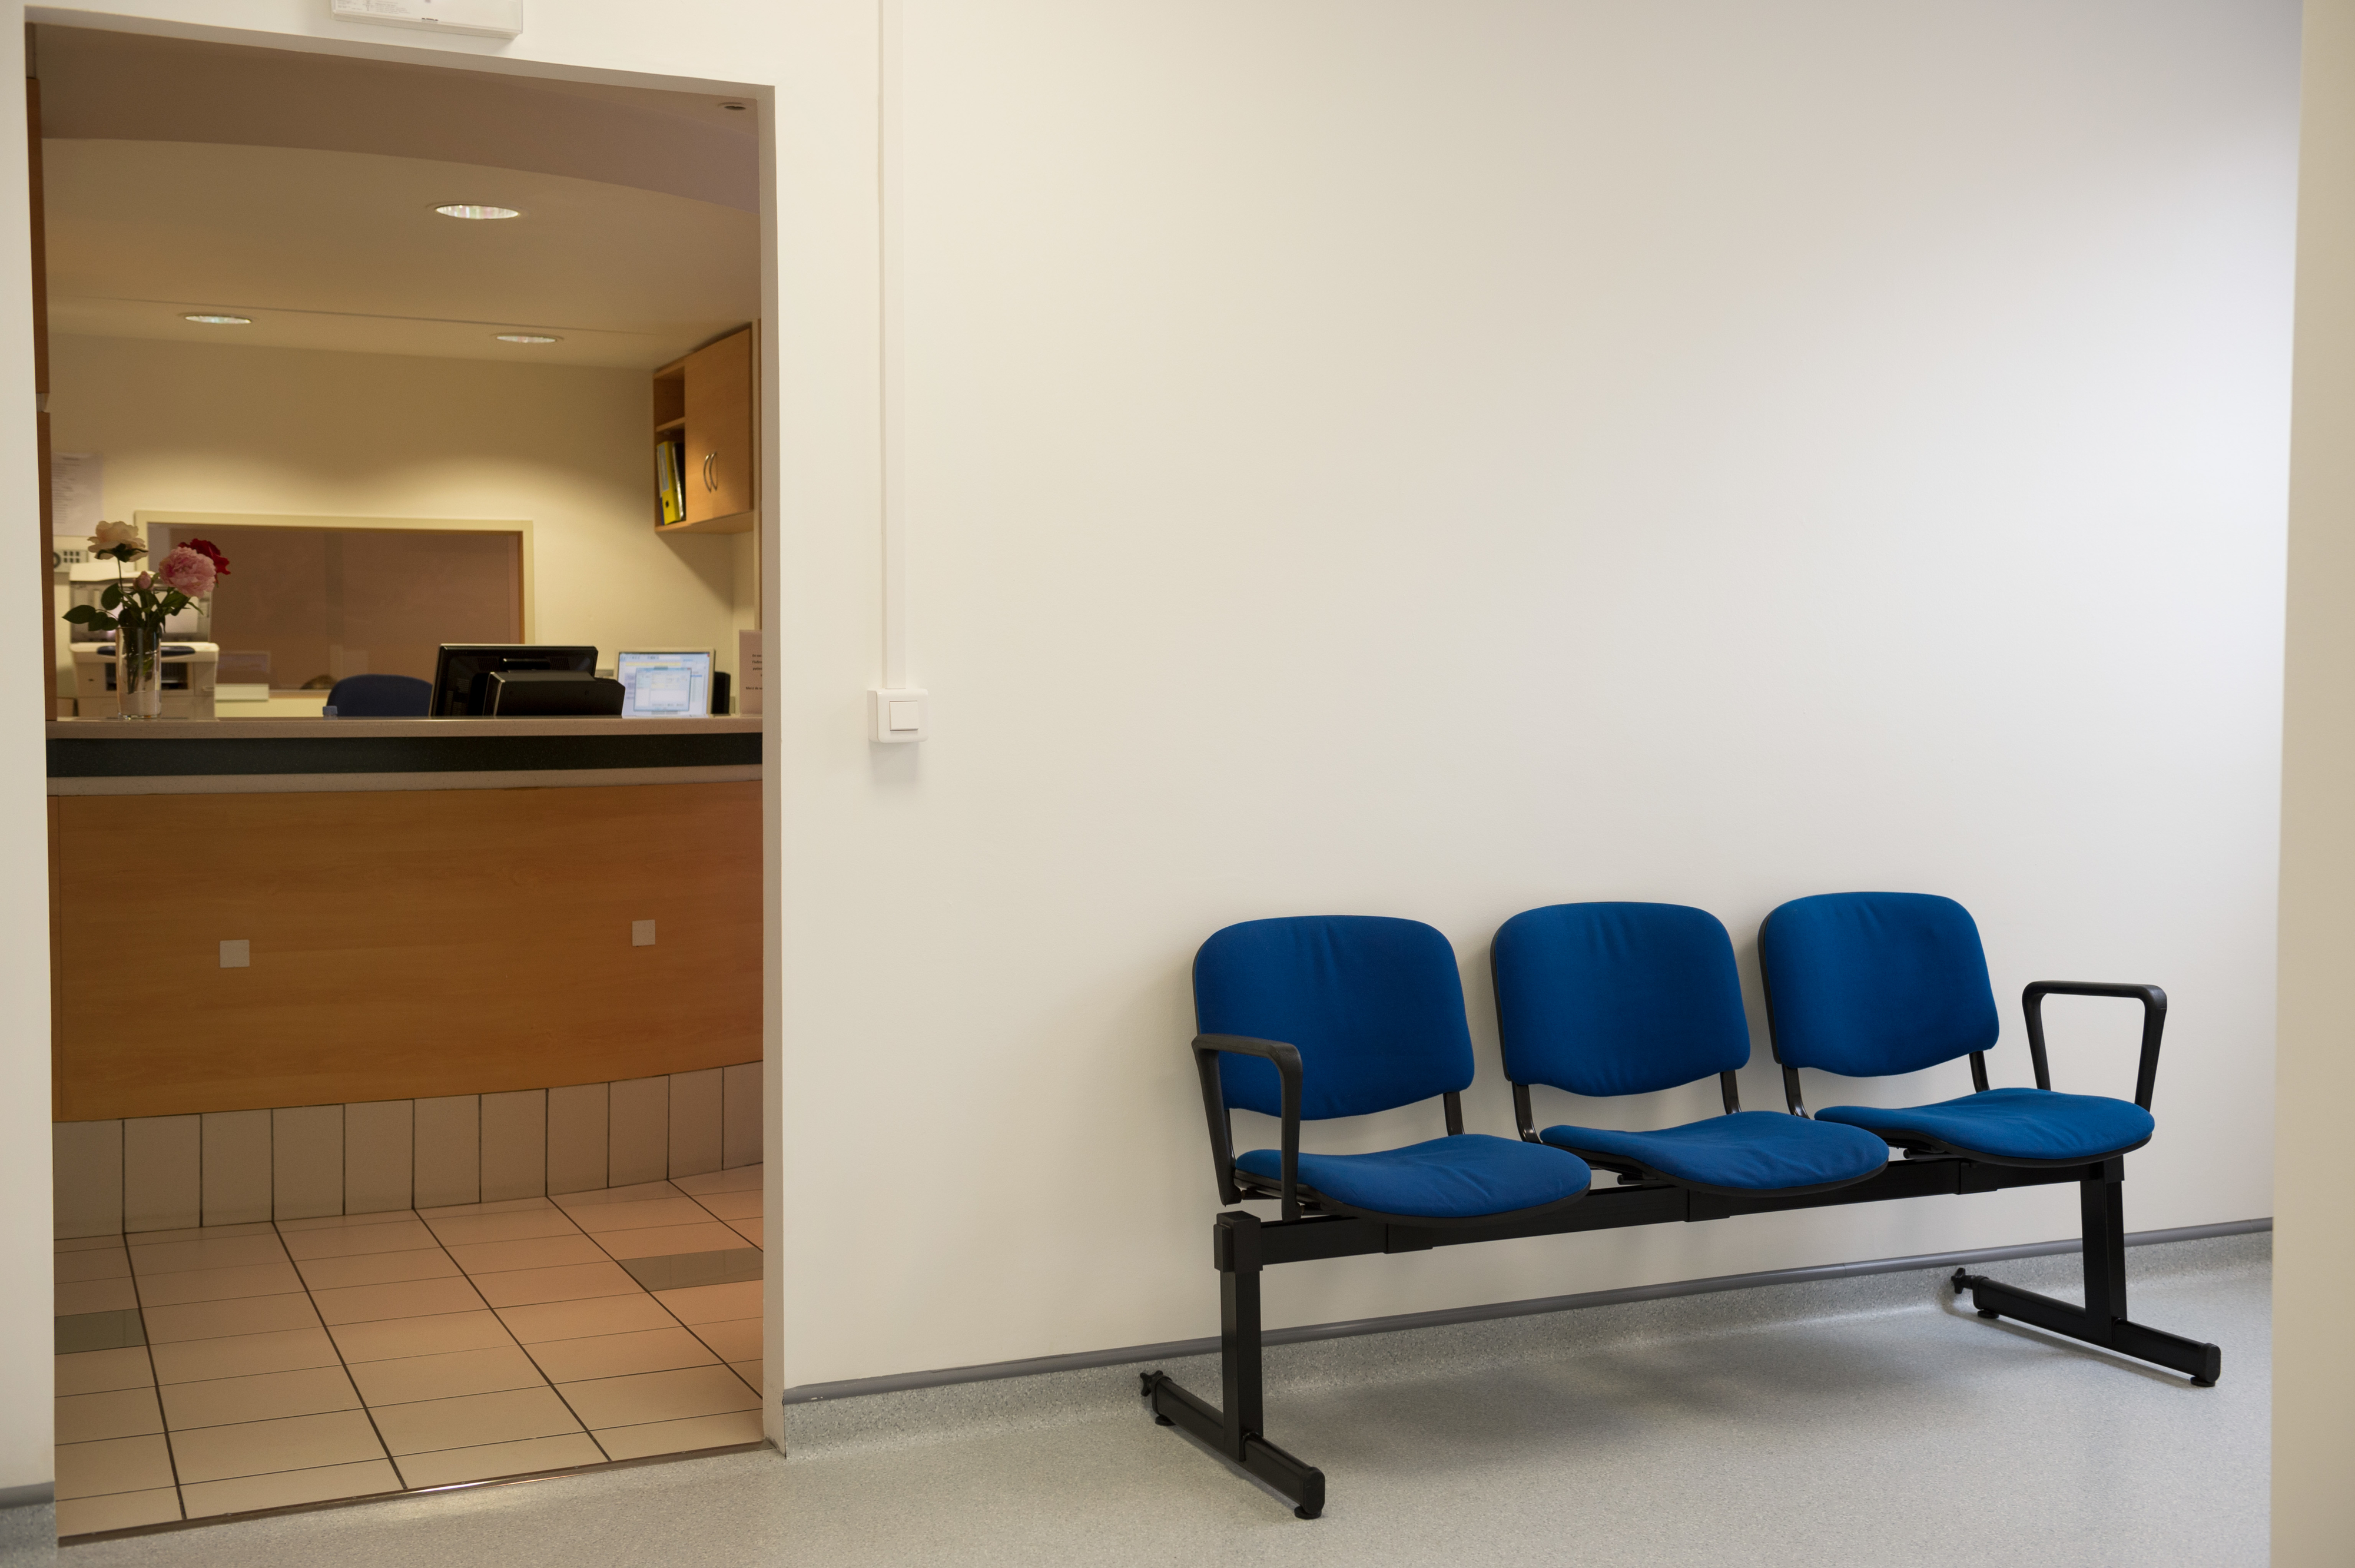 A clinic waiting room